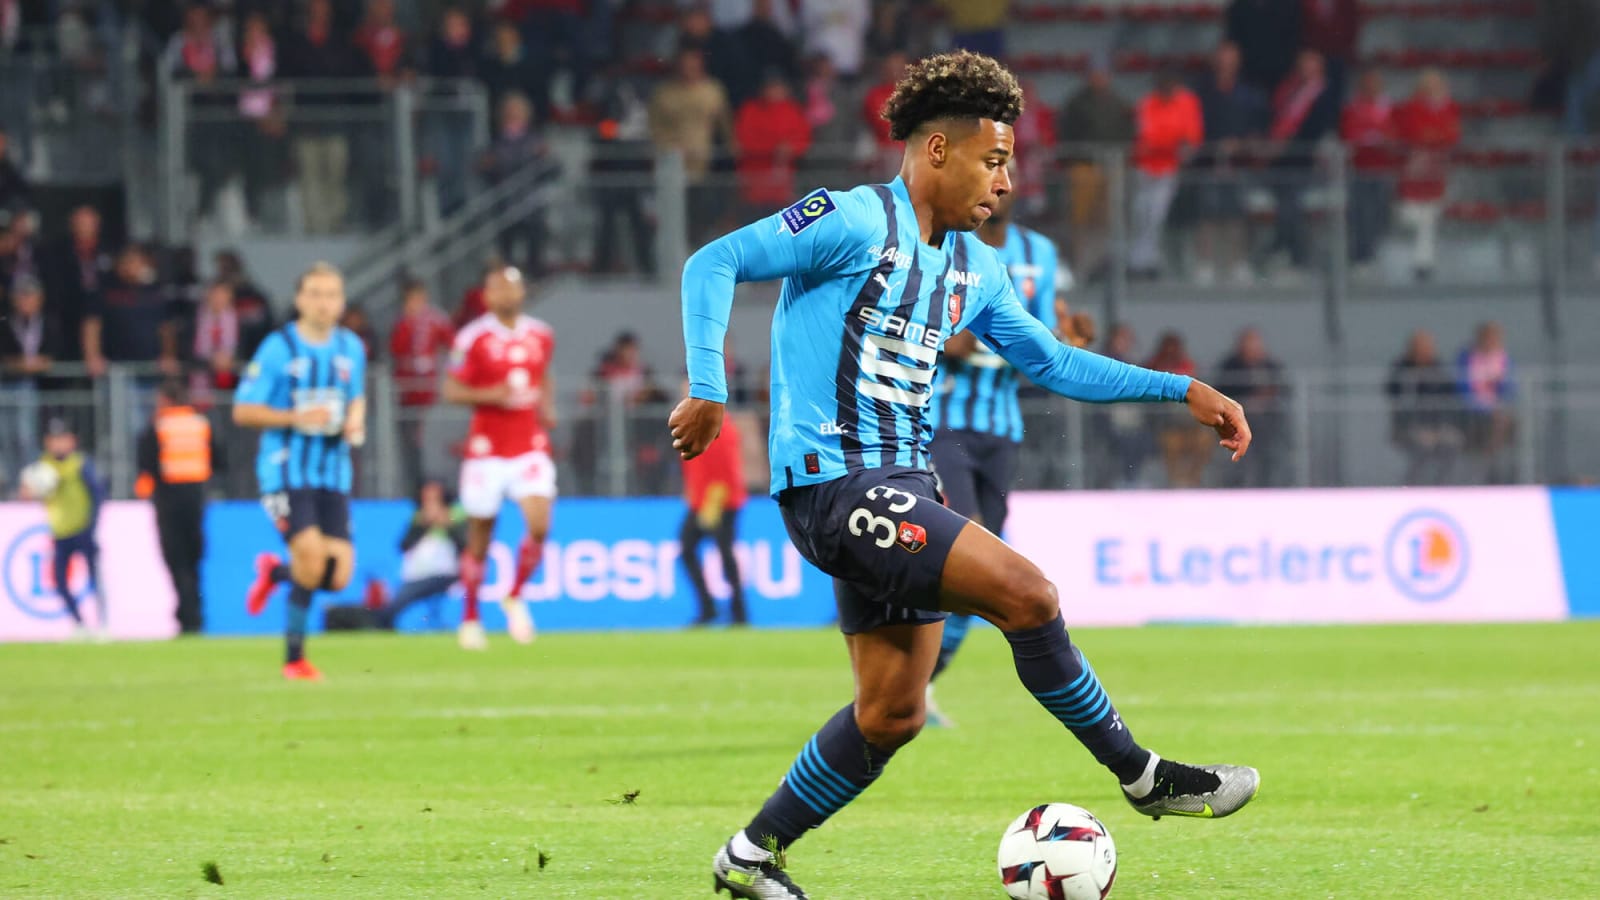 Newcastle keen on £12m playmaker, they ‘were in touch’ with the player’s agent